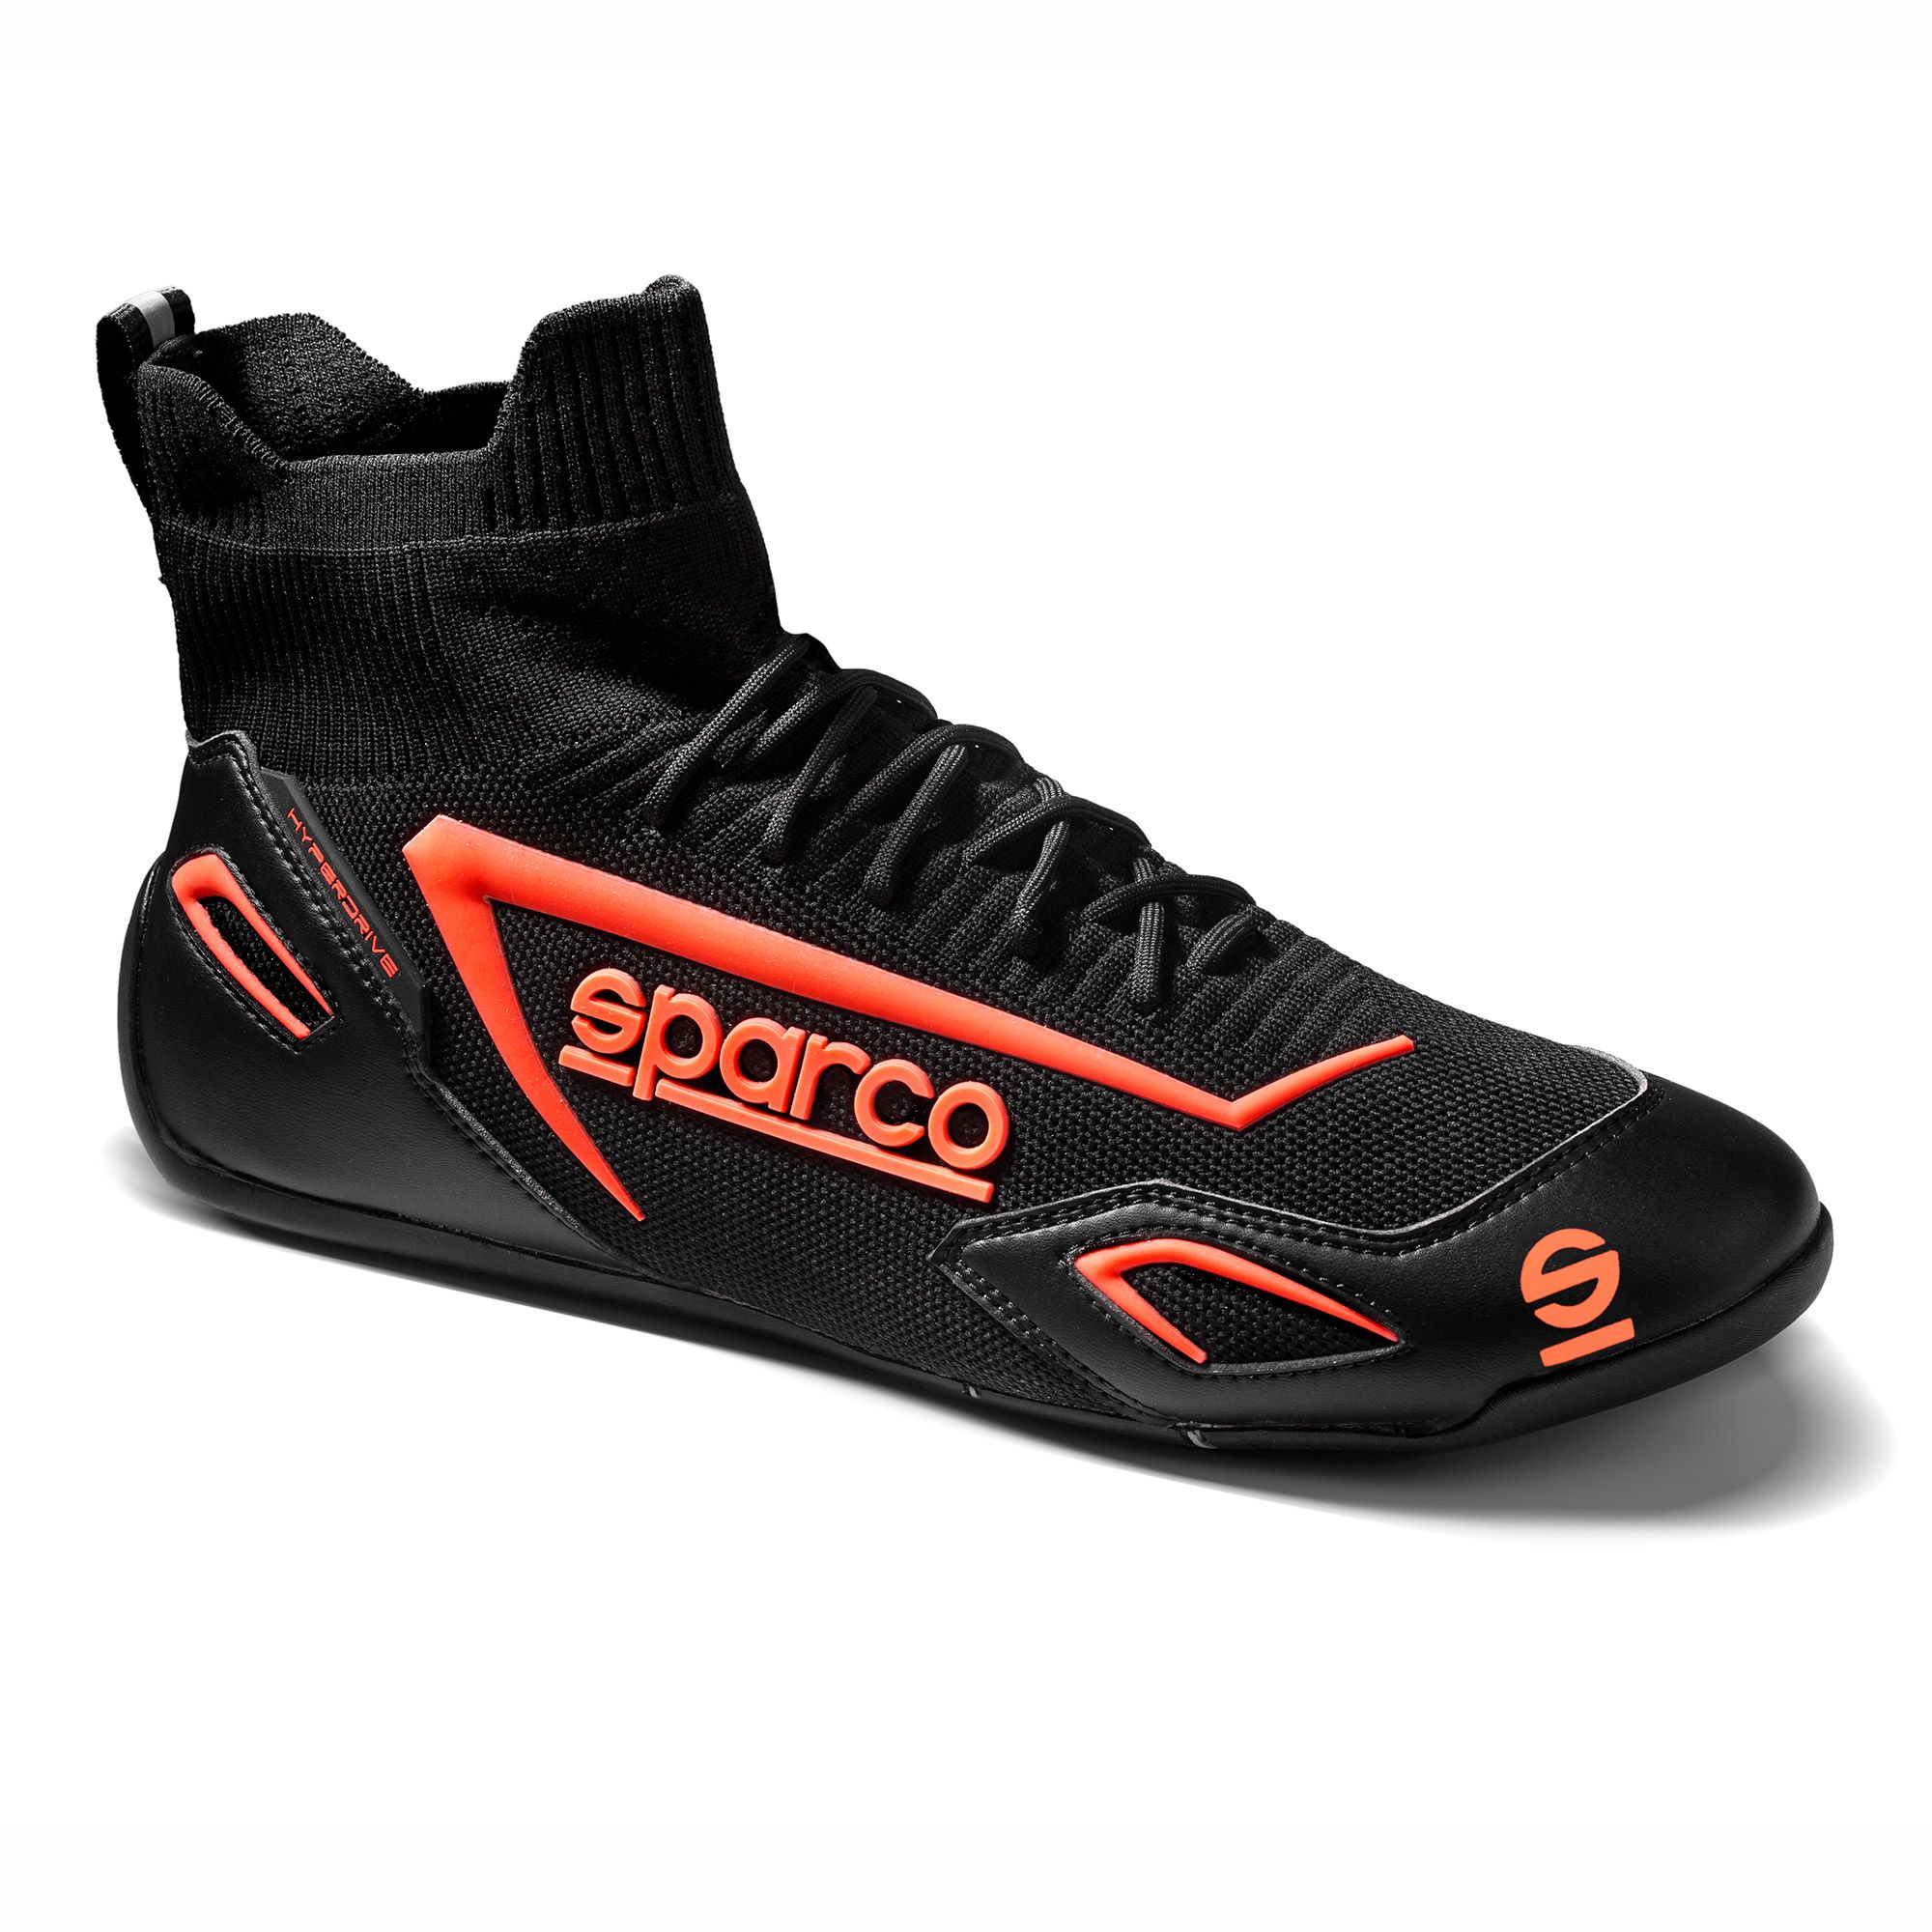 SPARCO 00129343NRRS Gaming sim racing shoes HYPERDRIVE, black/red, size 43 Photo-0 